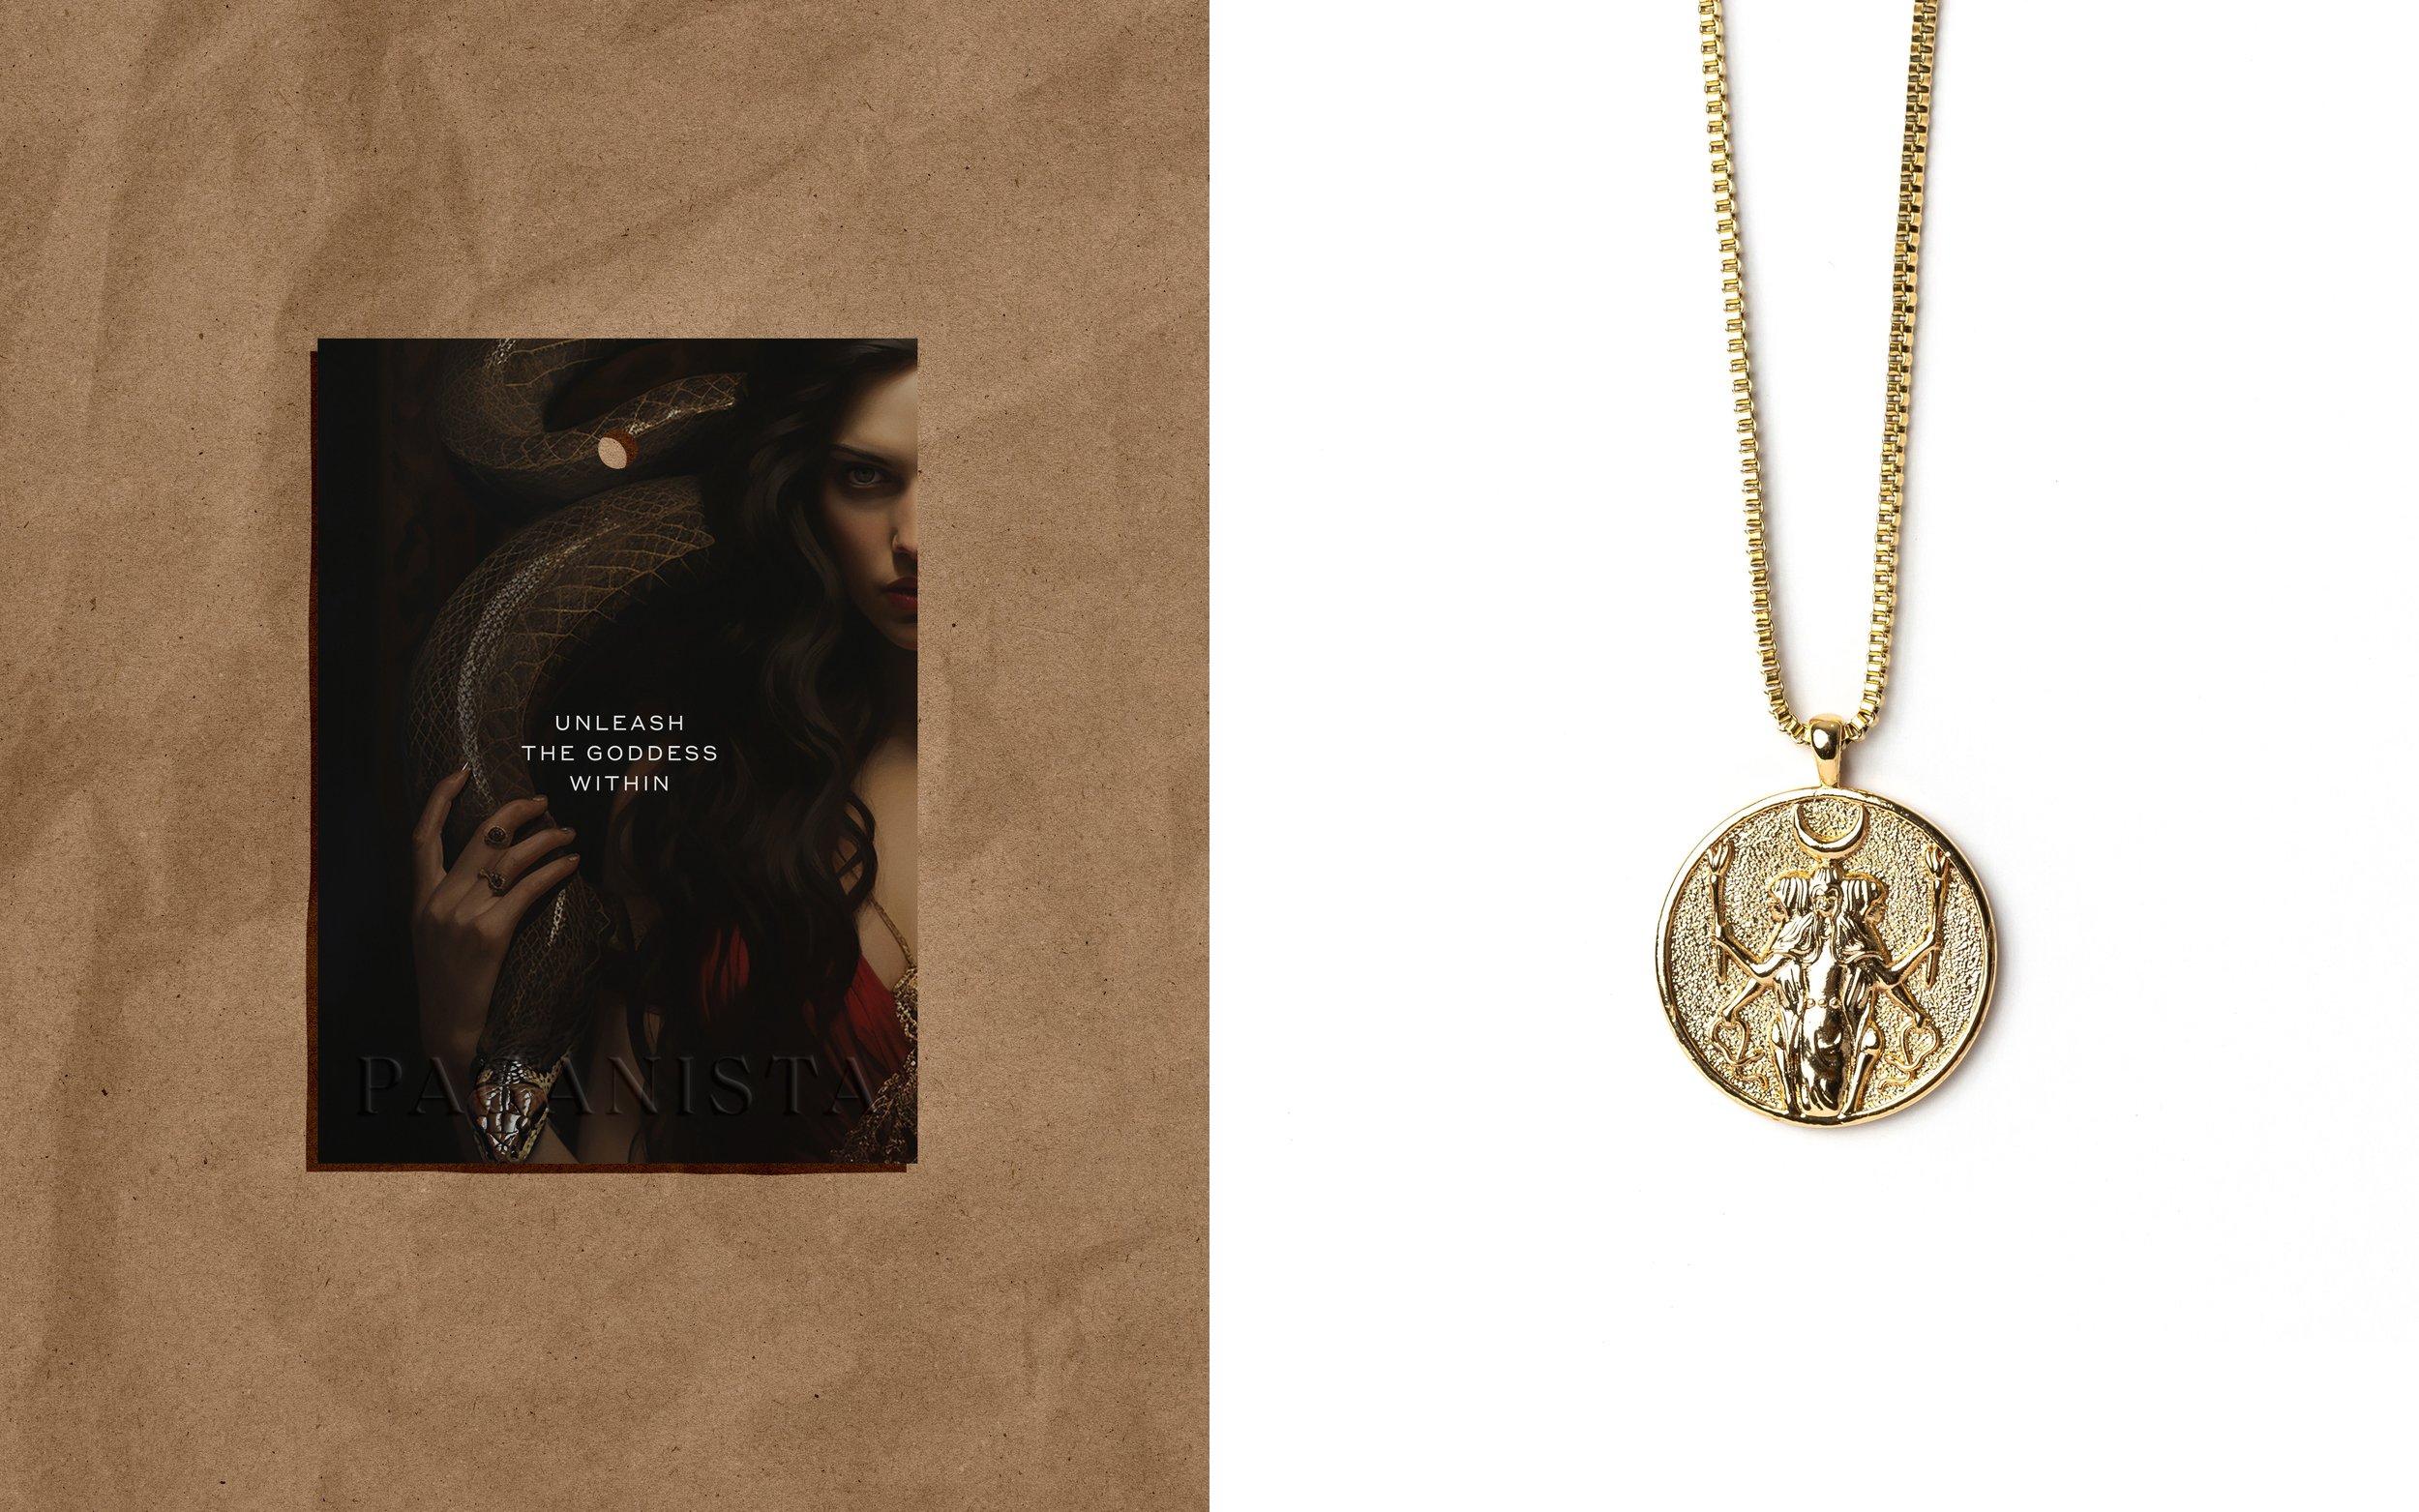 Paganista_Lilith-Goddess-Hangtag-Gold-Hecate-Pendant-Necklace.jpg